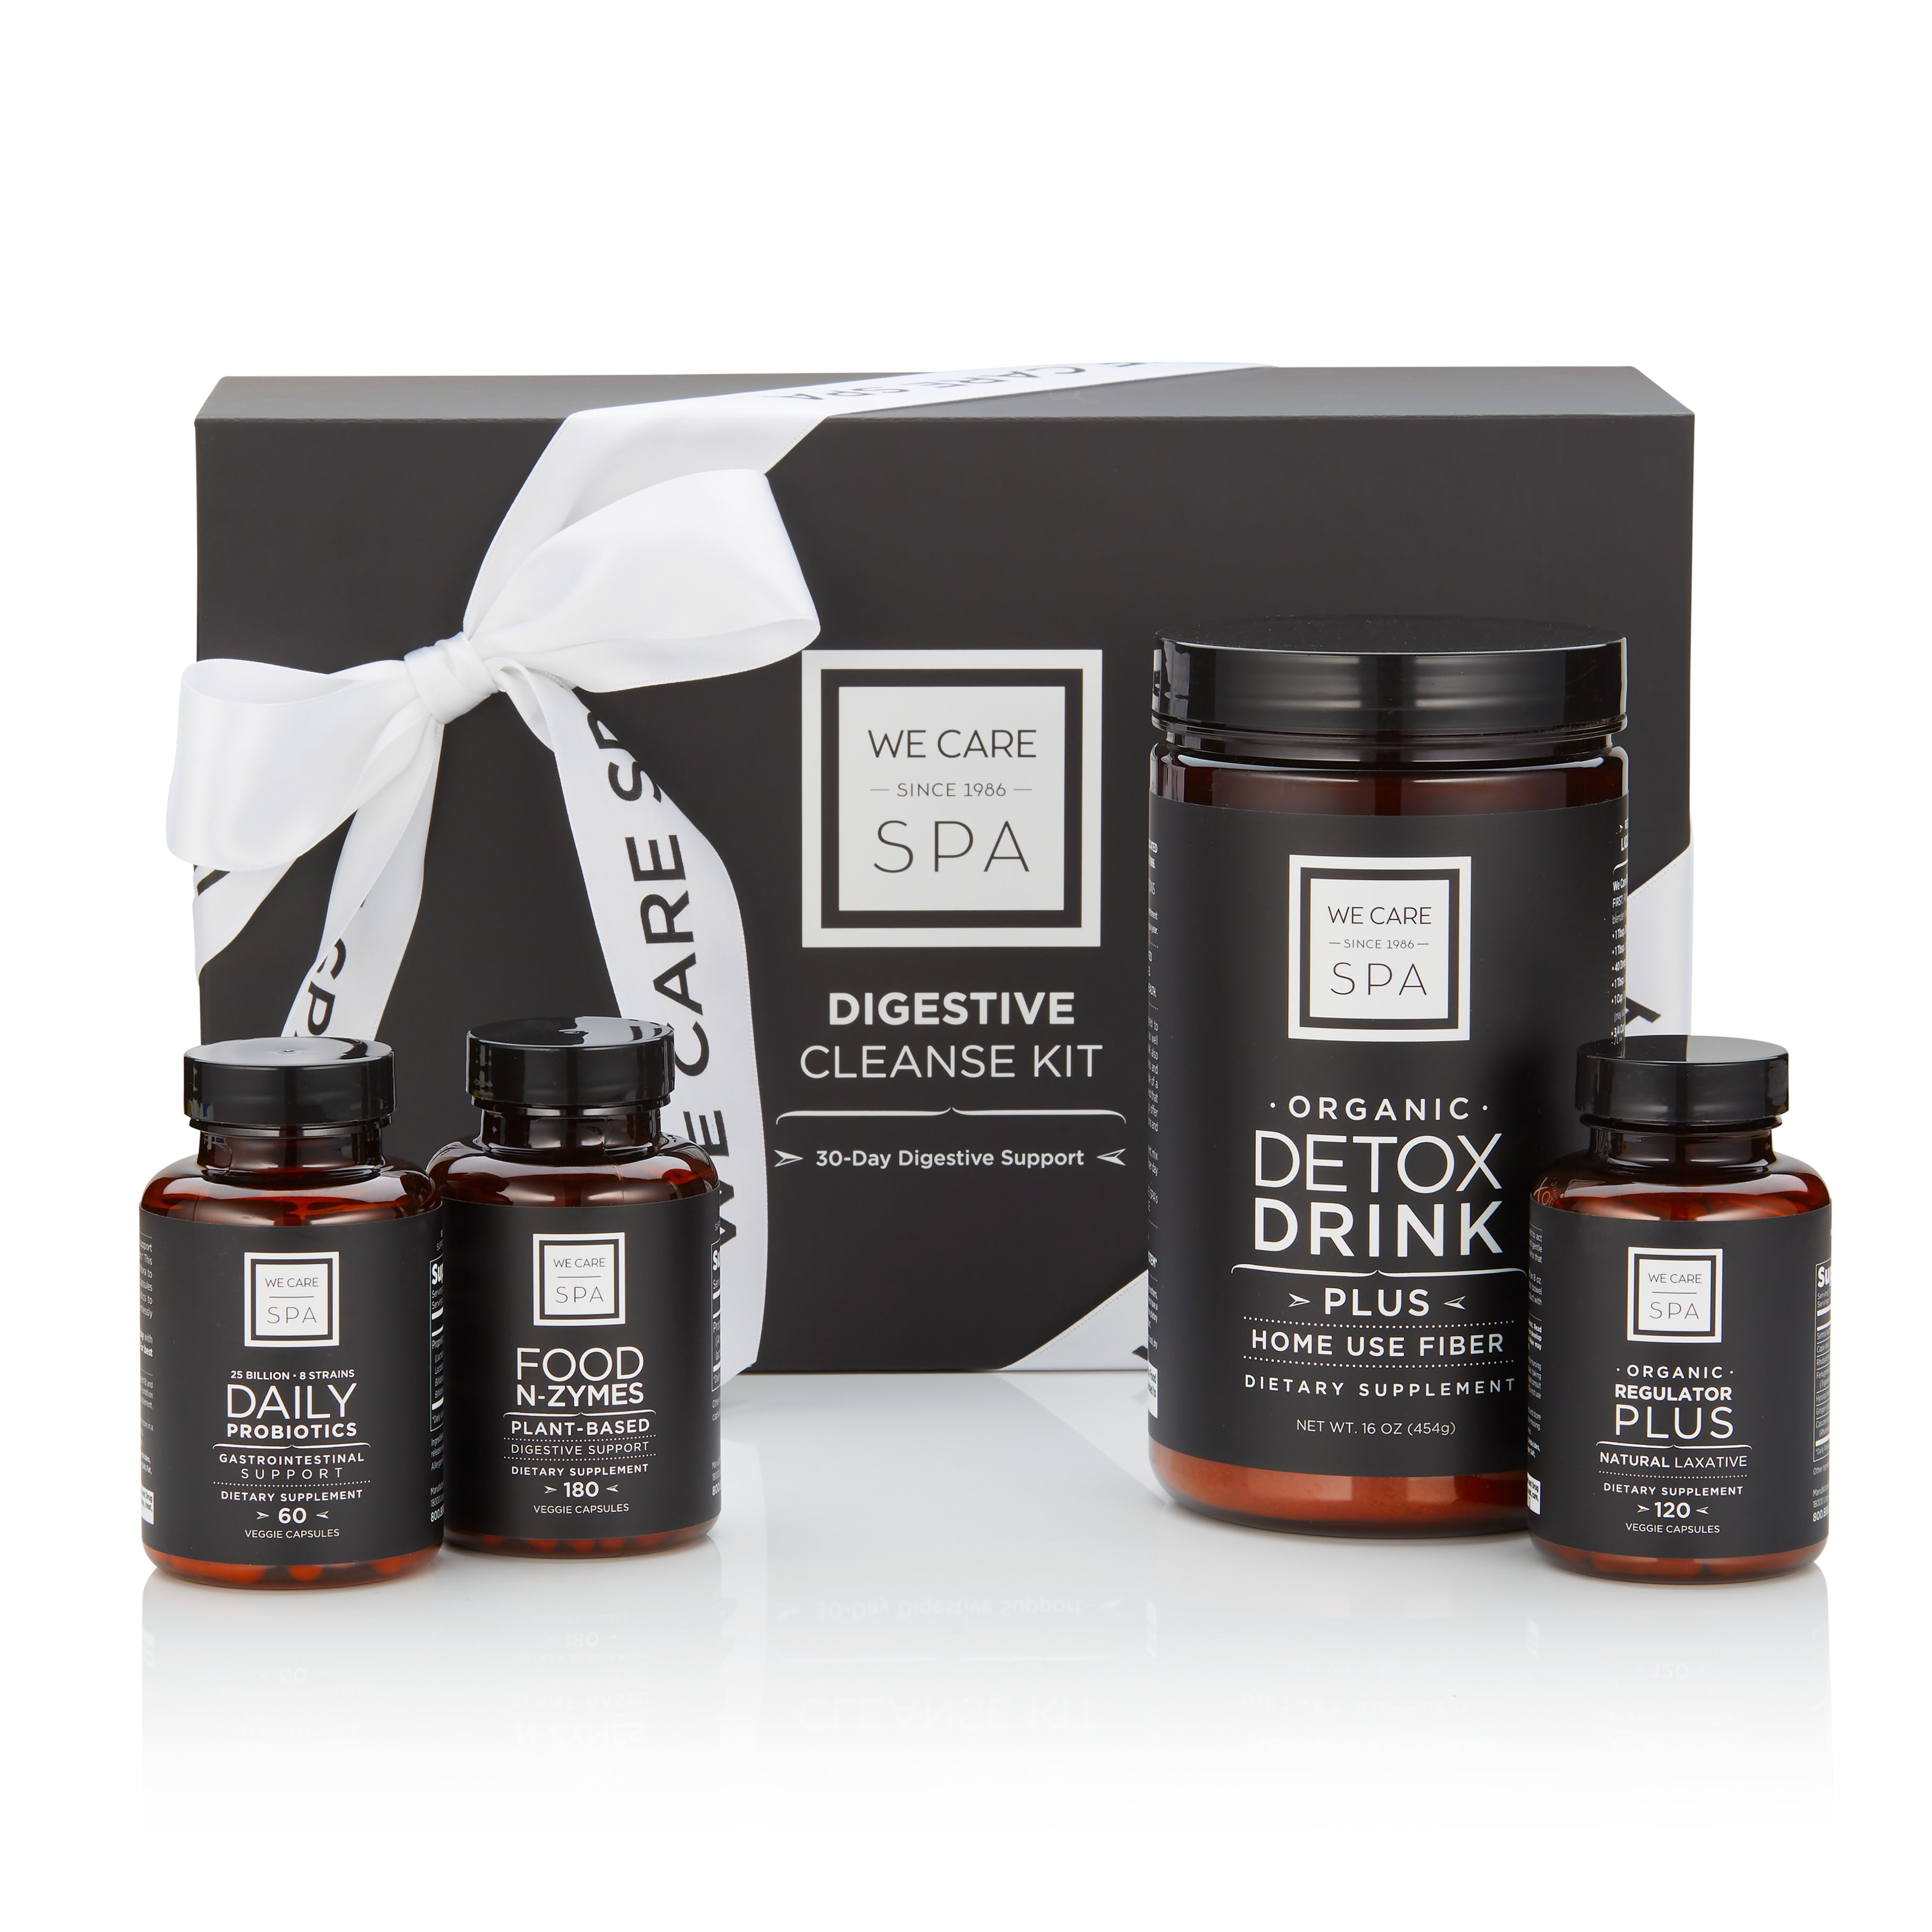 Digestive Cleanse Kit - 30 Day Digestive Support